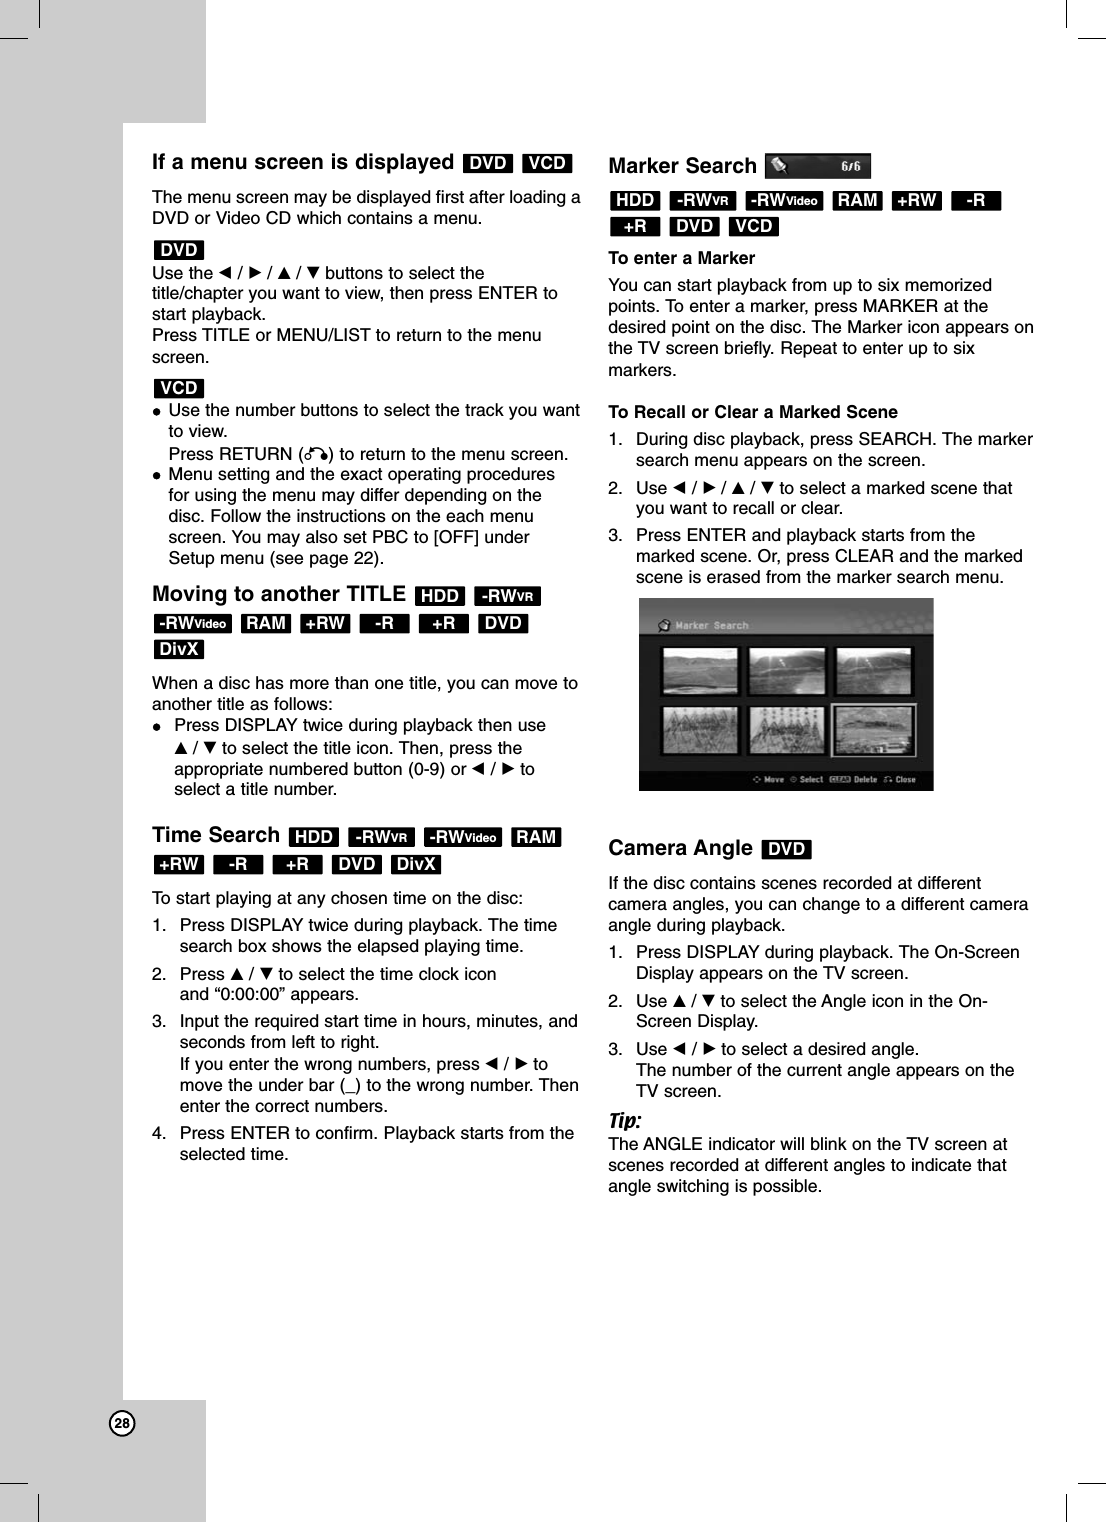 28If a menu screen is displayed The menu screen may be displayed first after loading aDVD or Video CD which contains a menu.Use the b/B/v/Vbuttons to select thetitle/chapter you want to view, then press ENTER tostart playback.Press TITLE or MENU/LIST to return to the menuscreen.Use the number buttons to select the track you wantto view.Press RETURN (O) to return to the menu screen.Menu setting and the exact operating proceduresfor using the menu may differ depending on thedisc. Follow the instructions on the each menuscreen. You may also set PBC to [OFF] underSetup menu (see page 22).Moving to another TITLE When a disc has more than one title, you can move toanother title as follows:Press DISPLAY twice during playback then use v/Vto select the title icon. Then, press theappropriate numbered button (0-9) or b/Btoselect a title number.Time Search To start playing at any chosen time on the disc:1. Press DISPLAY twice during playback. The timesearch box shows the elapsed playing time.2. Press v/Vto select the time clock icon and “0:00:00” appears.3. Input the required start time in hours, minutes, andseconds from left to right. If you enter the wrong numbers, press b/Btomove the under bar (_) to the wrong number. Thenenter the correct numbers.4. Press ENTER to confirm. Playback starts from theselected time.Marker SearchTo enter a Marker You can start playback from up to six memorizedpoints. To enter a marker, press MARKER at thedesired point on the disc. The Marker icon appears onthe TV screen briefly. Repeat to enter up to sixmarkers.To Recall or Clear a Marked Scene1. During disc playback, press SEARCH. The markersearch menu appears on the screen.2. Use b/B/v/Vto select a marked scene thatyou want to recall or clear.3. Press ENTER and playback starts from themarked scene. Or, press CLEAR and the markedscene is erased from the marker search menu.Camera Angle If the disc contains scenes recorded at differentcamera angles, you can change to a different cameraangle during playback.1. Press DISPLAY during playback. The On-ScreenDisplay appears on the TV screen.2. Use v/Vto select the Angle icon in the On-Screen Display.3. Use b/Bto select a desired angle.The number of the current angle appears on theTV screen.Tip:The ANGLE indicator will blink on the TV screen atscenes recorded at different angles to indicate thatangle switching is possible.DVDVCDDVD+R-R+RWRAM-RWVideo-RWVRHDDDivXDVD+R-R+RWRAM-RWVideo-RWVRHDDDivXDVD+R-R+RWRAM-RWVideo-RWVRHDDVCDDVDVCDDVD